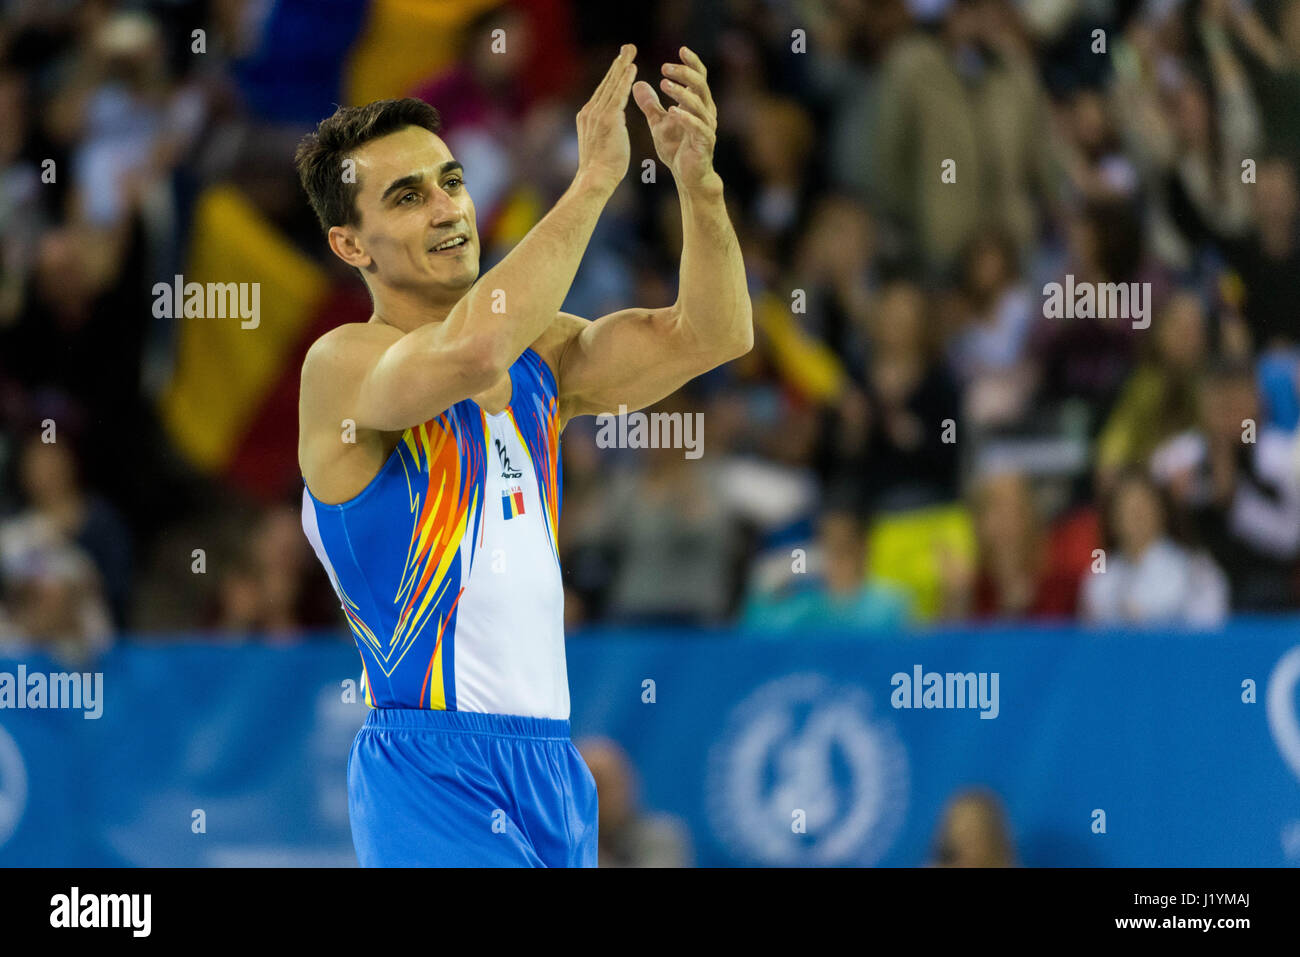 Marian Dragulescu (ROU) after his performance on the floor during the Men's Apparatus Finals at the European Men's and Women's Artistic Gymnastics Championships in Cluj Napoca, Romania. 22.04.2017 Photo: Catalin Soare/dpa Stock Photo